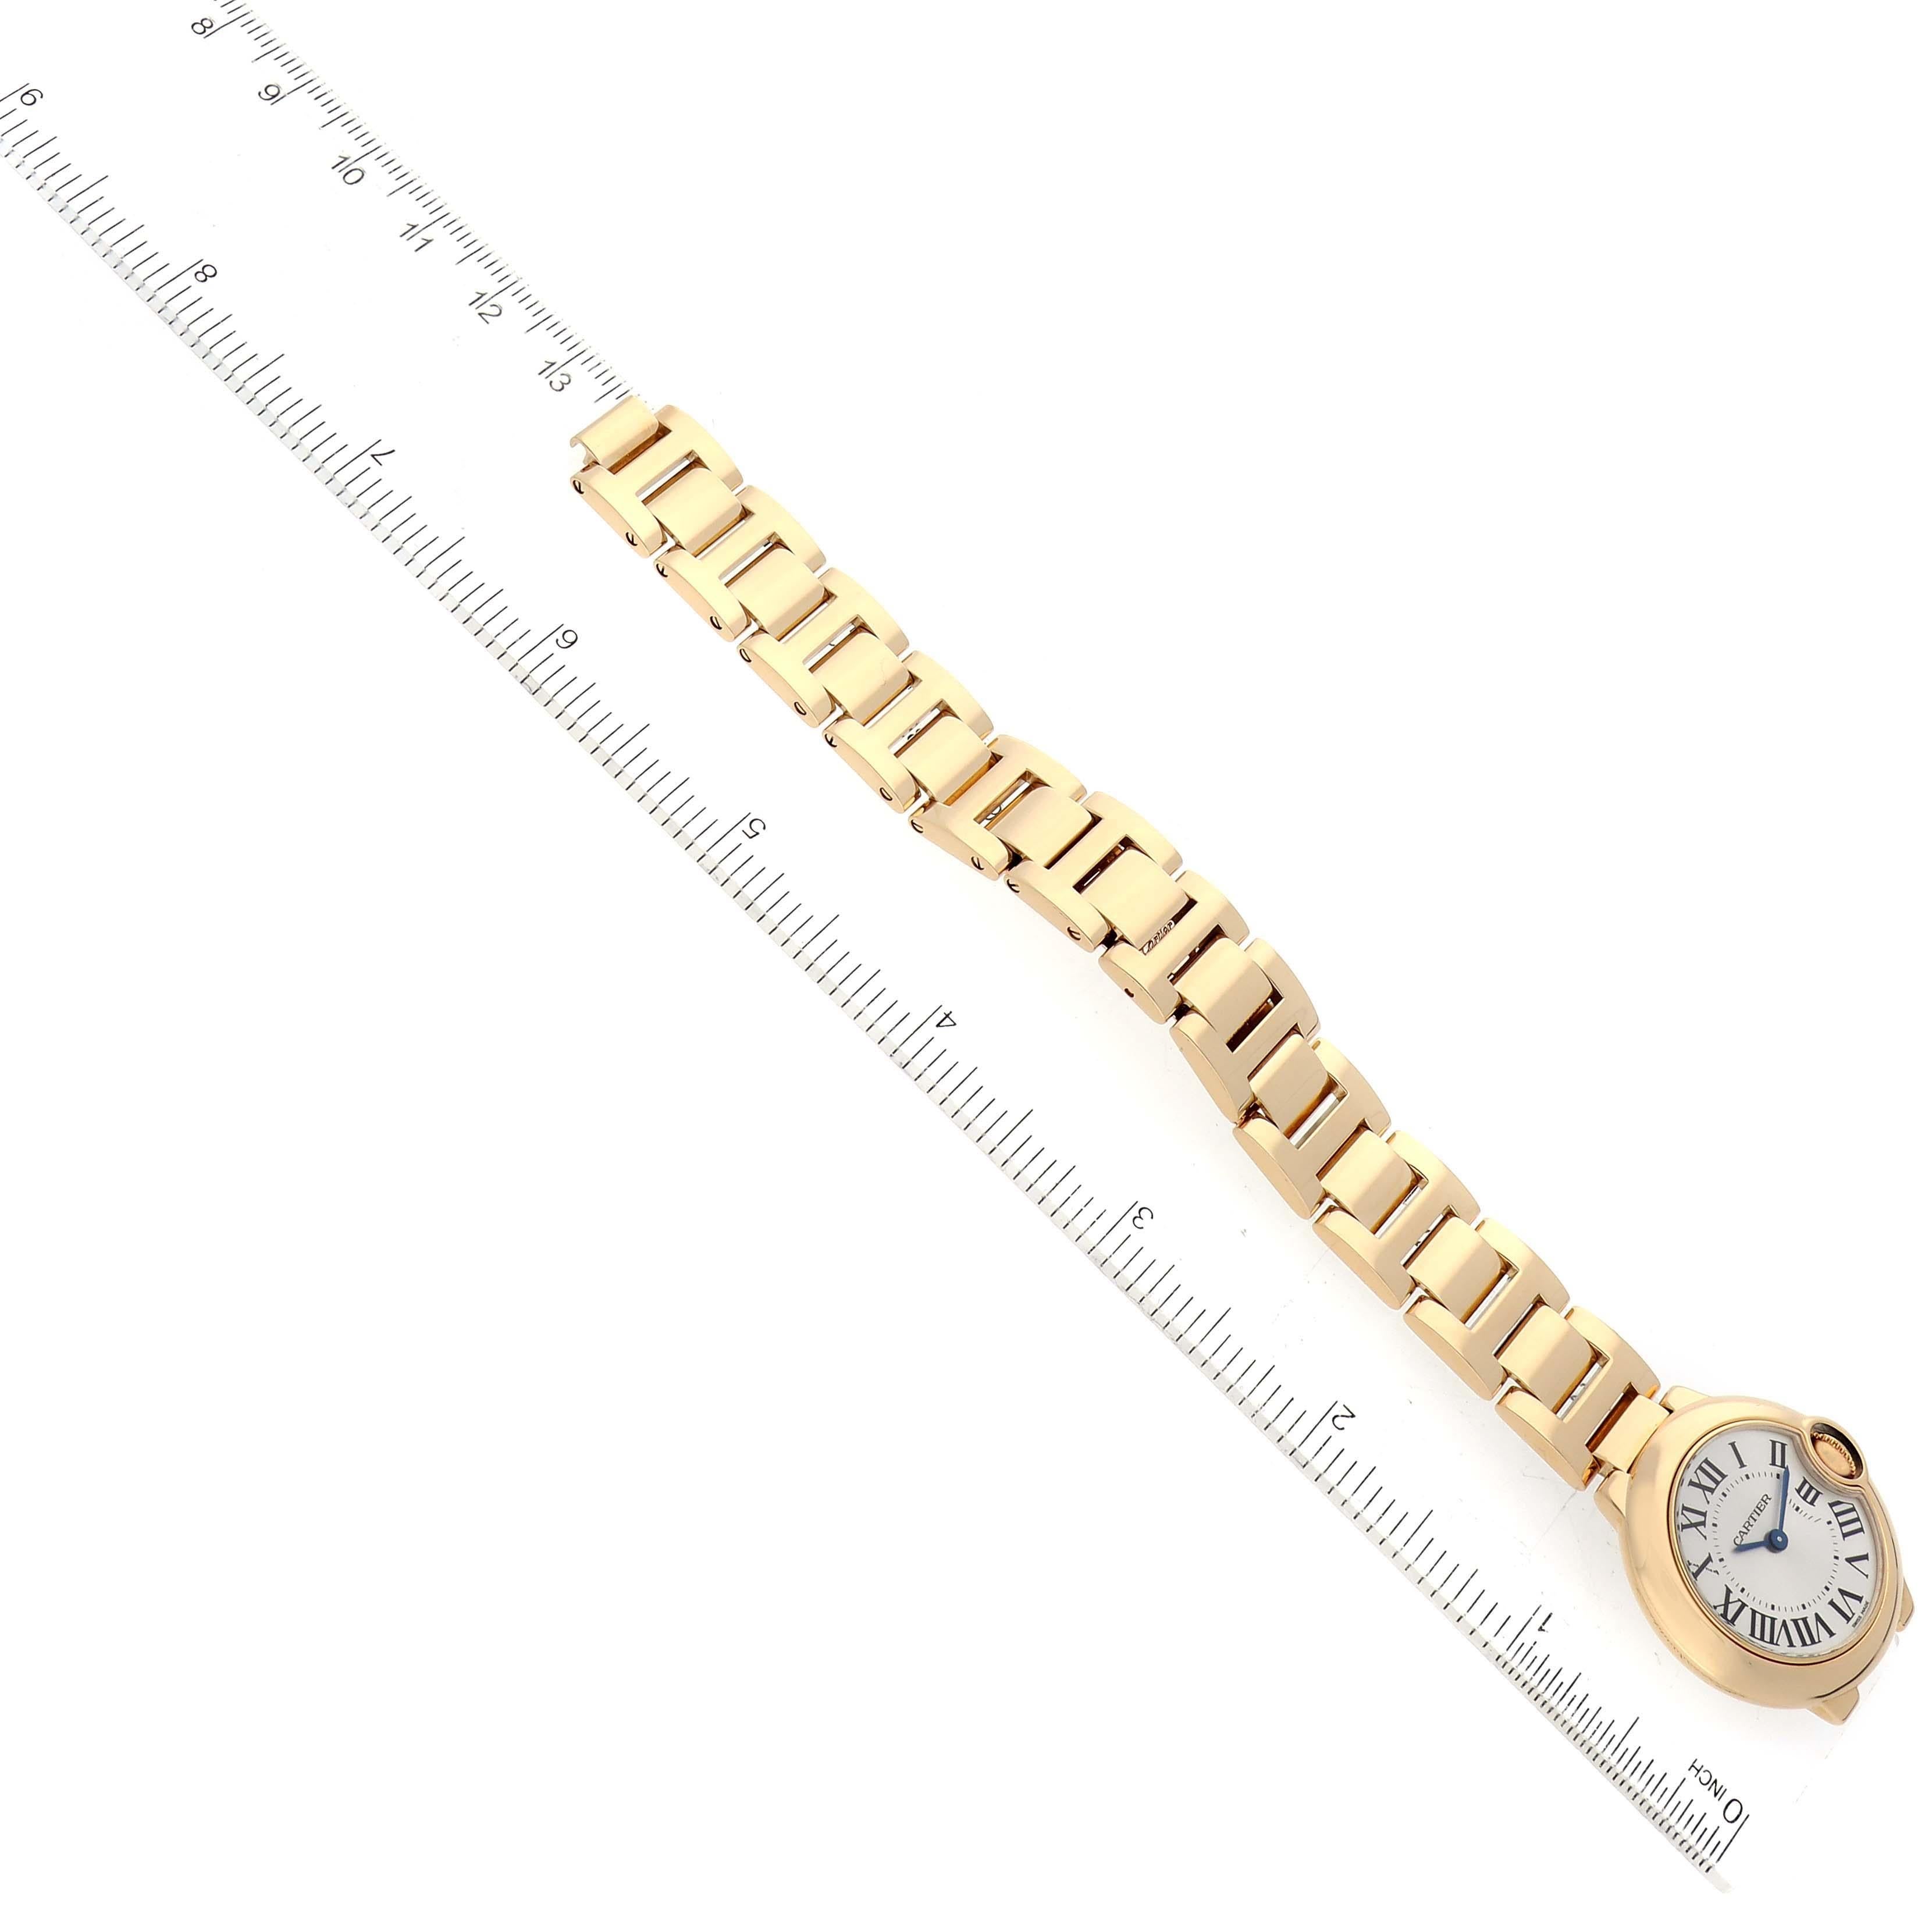 Cartier Ballon Bleu Yellow Gold Ladies Watch W69001Z2. Quartz movement. Caliber 057. Round 18K yellow gold case 28 mm in diameter. Fluted crown set with a blue sapphire cabochon. . Scratch resistant sapphire crystal. Silver sunburst dial with Roman